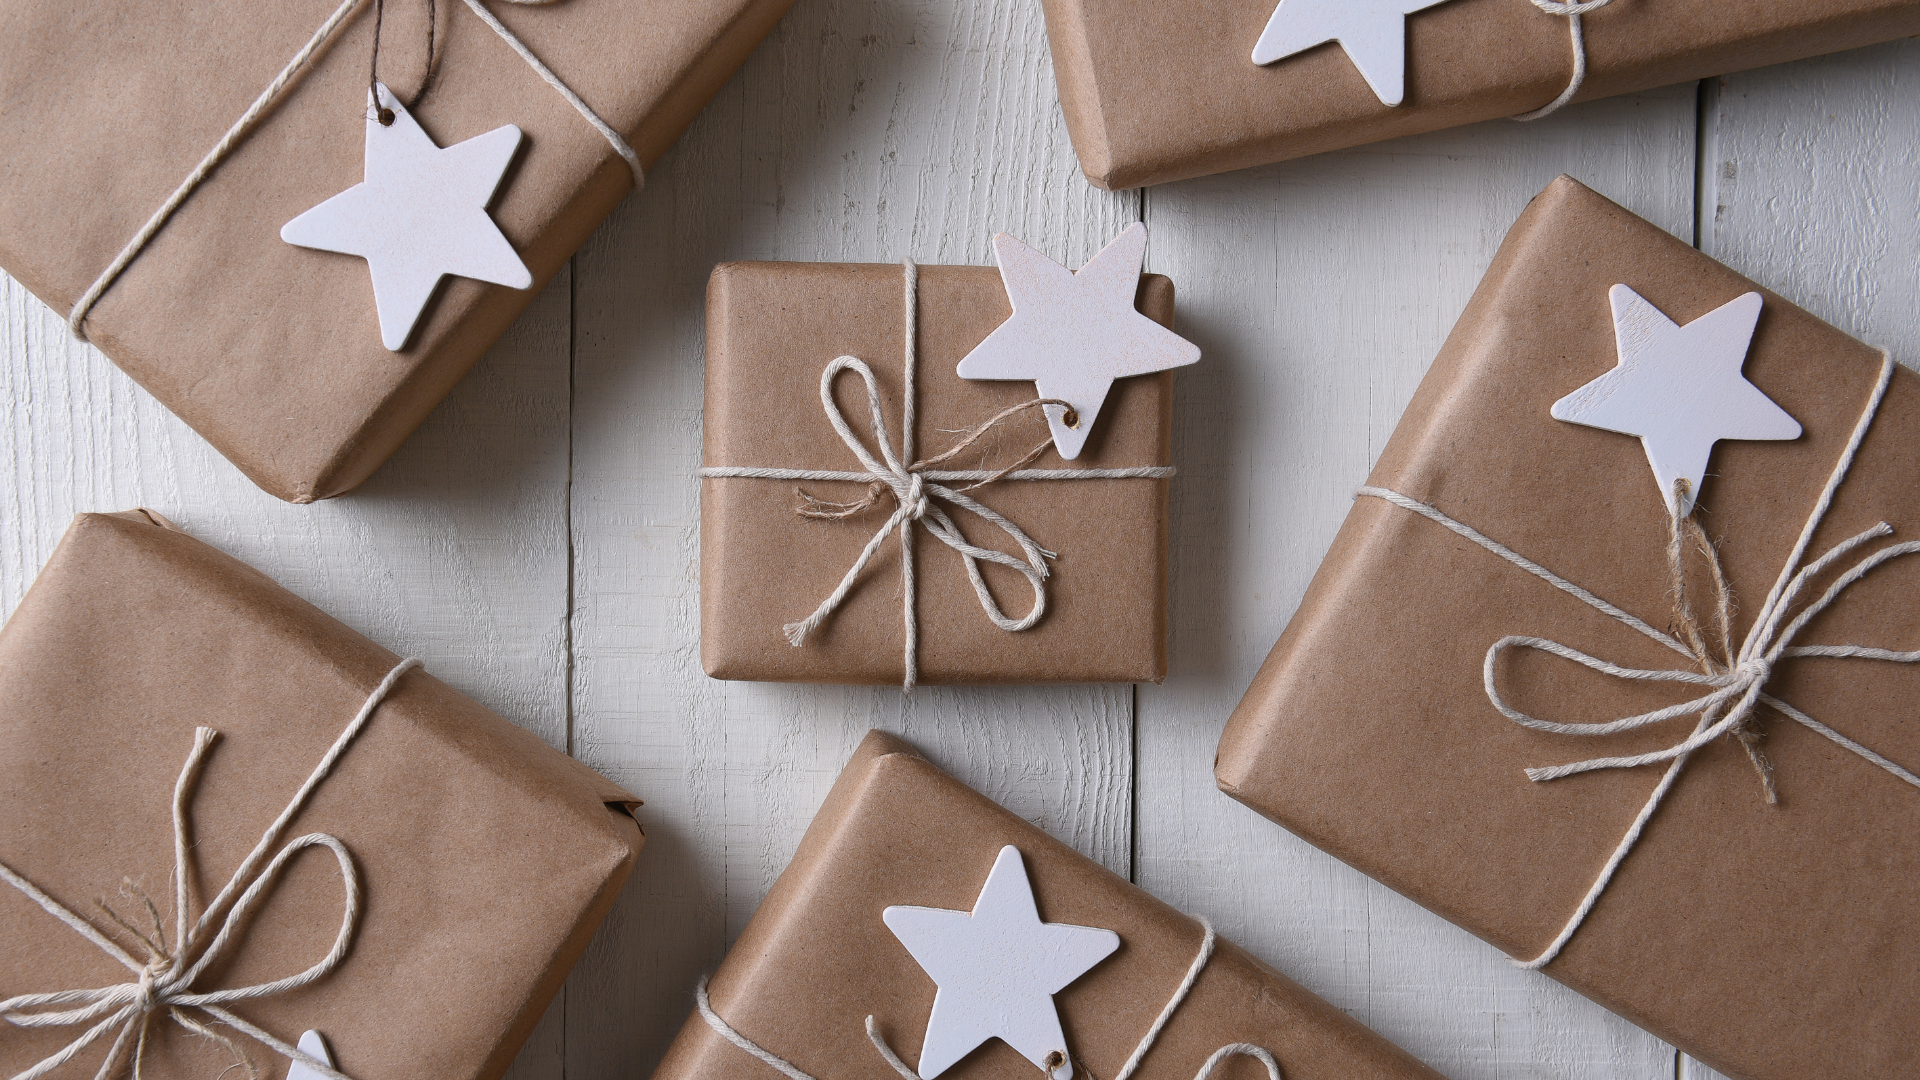 10 Children's Gifts Ideas for Traditional Christmas Fun